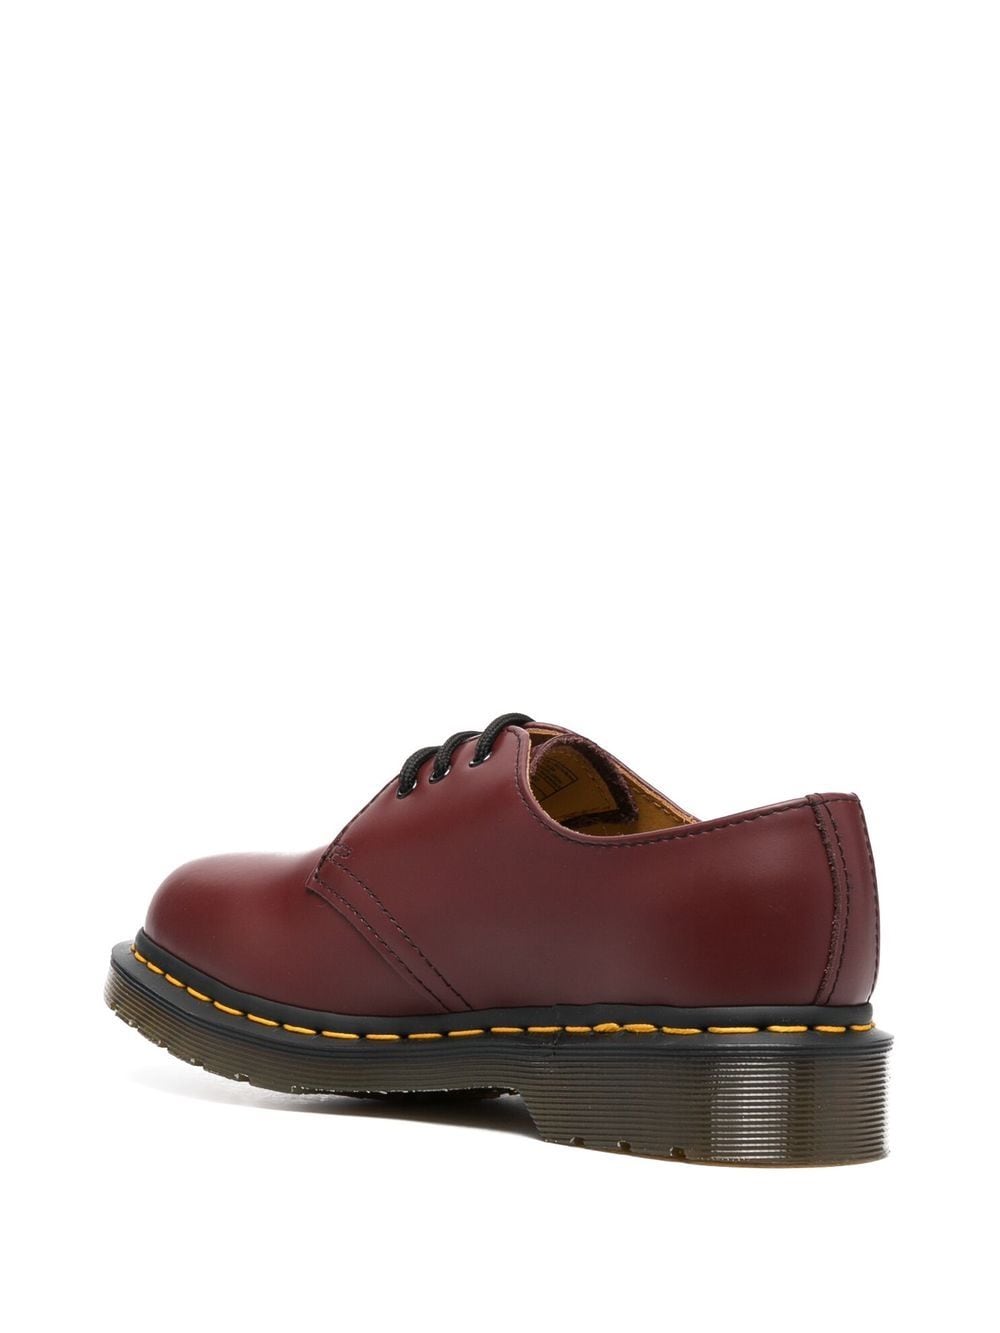 1461 leather Oxford shoes